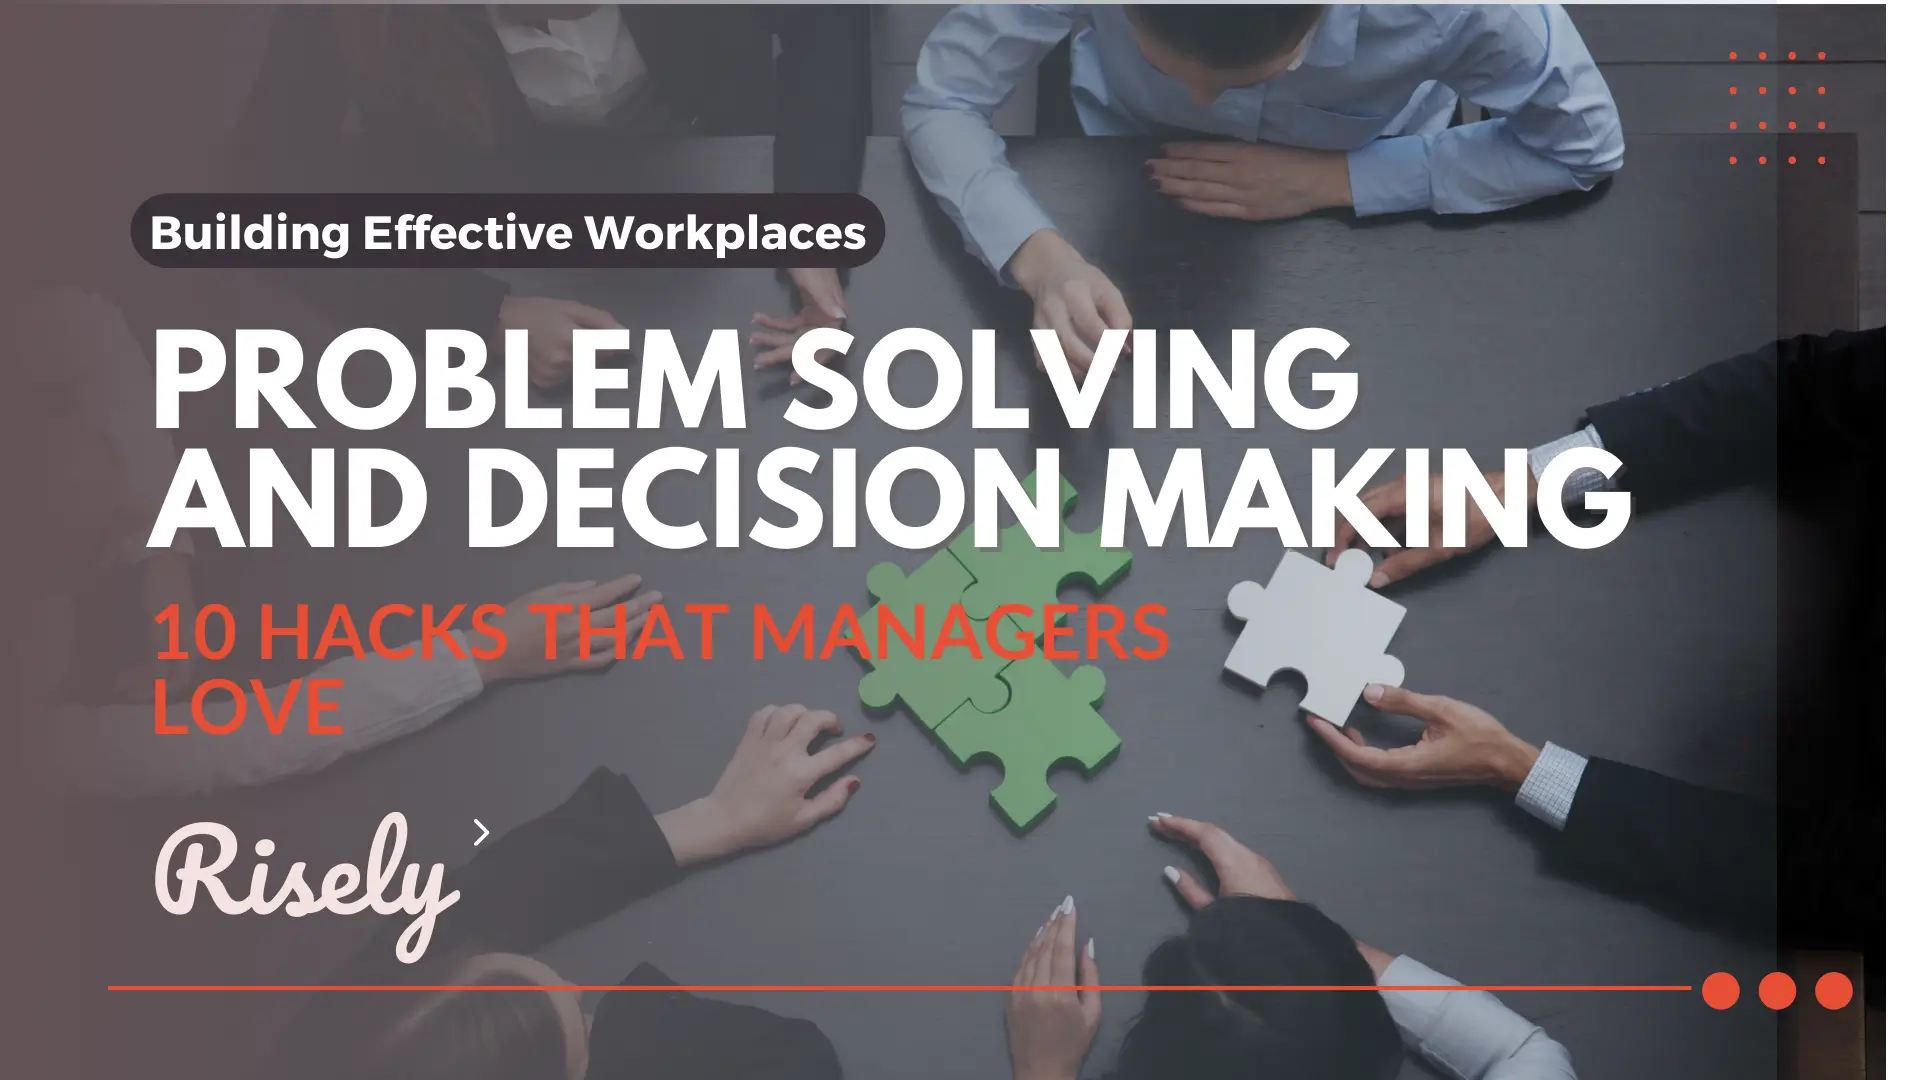 Problem Solving And Decision Making 10 Hacks That Managers Love